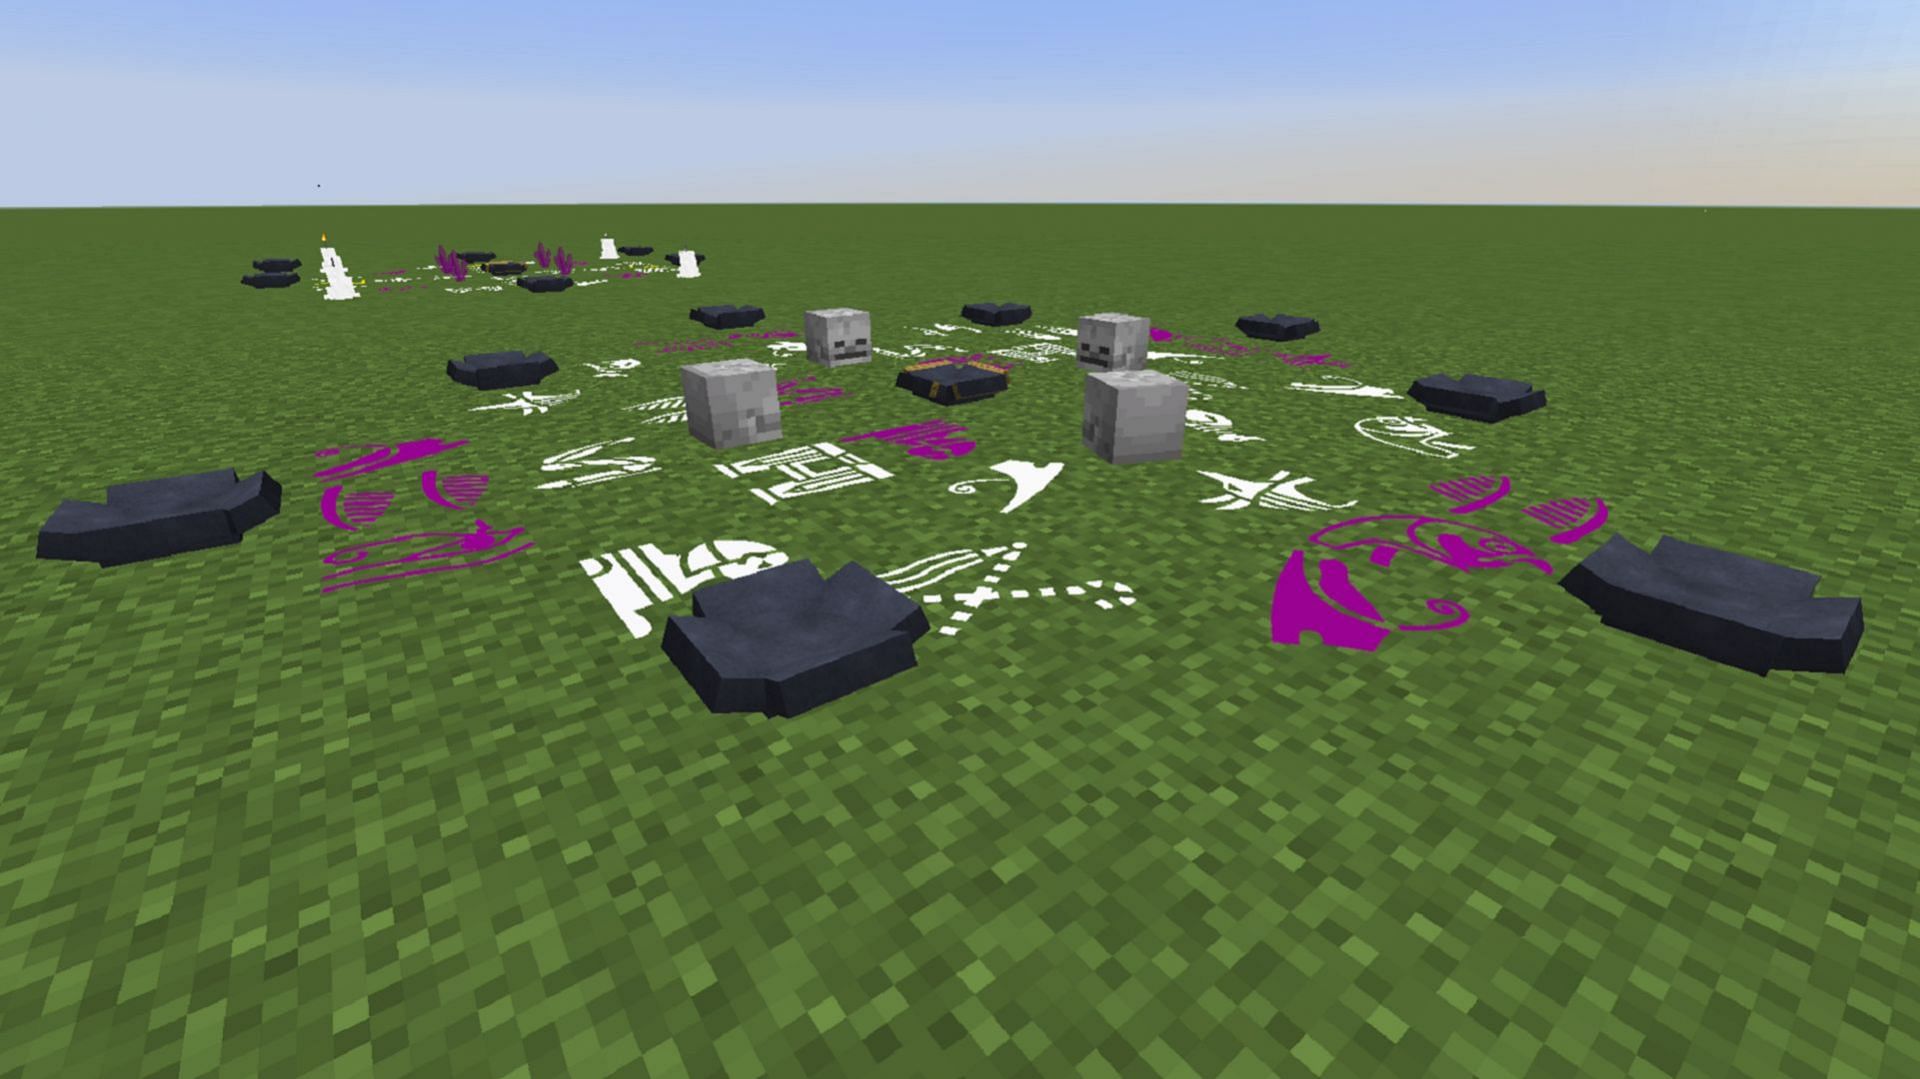 Minecraft might have magical elements, but full-fledged spellcasting would be welcomed (Image via Klikli-dev/Modrinth)